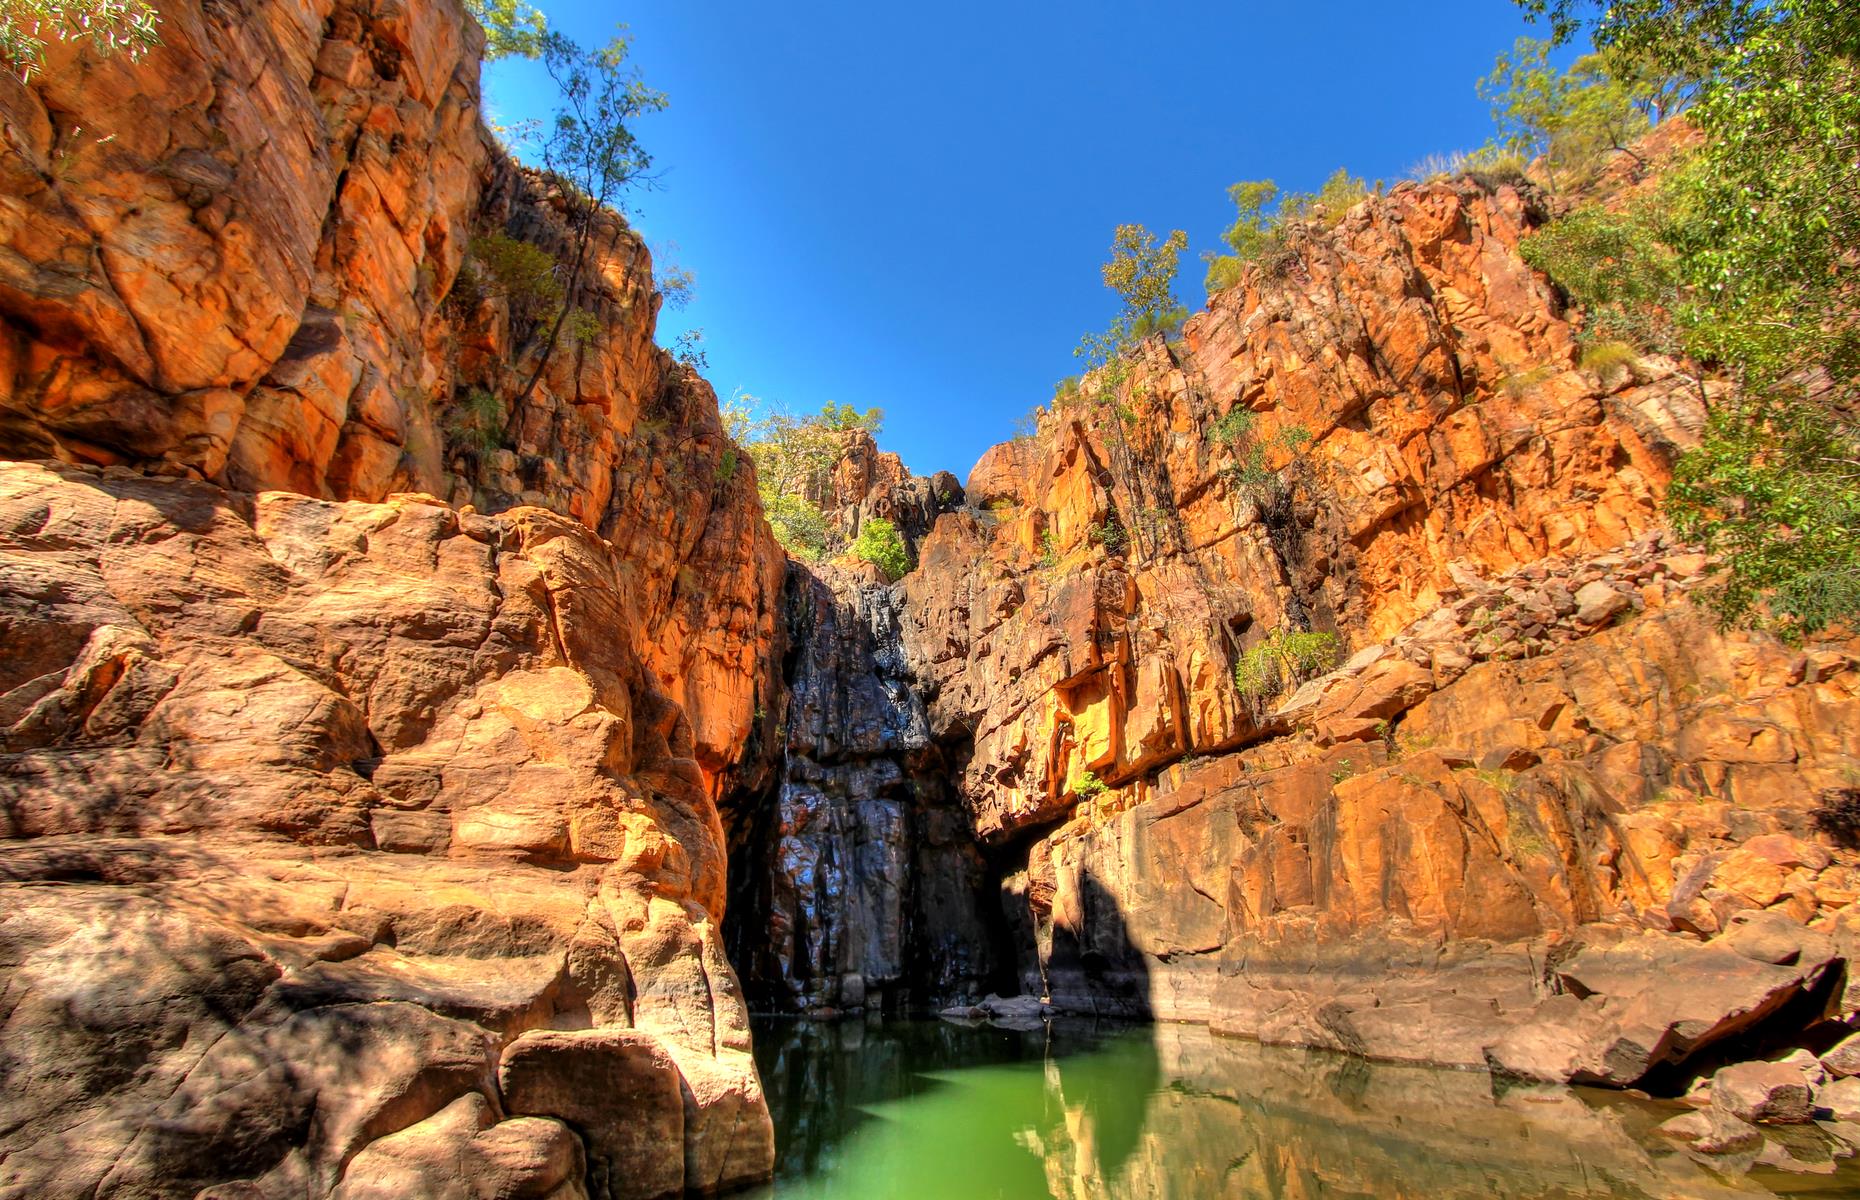 <p>Another of the Northern Territory’s colossal natural formations, the mighty Nitmiluk Gorge (sometimes known as Katherine Gorge) is a sight to behold. The vast chasm has been carved out of the sandstone cliffs by the Katherine River over thousands of years. In fact, it’s made up of 13 separate gorges and steeped in sacred places to the Jawoyn people. The best way to appreciate its size is by canoeing along the river to gaze up at the sheer cliffs and pass by its waterfalls and ancient rock art sites.</p>